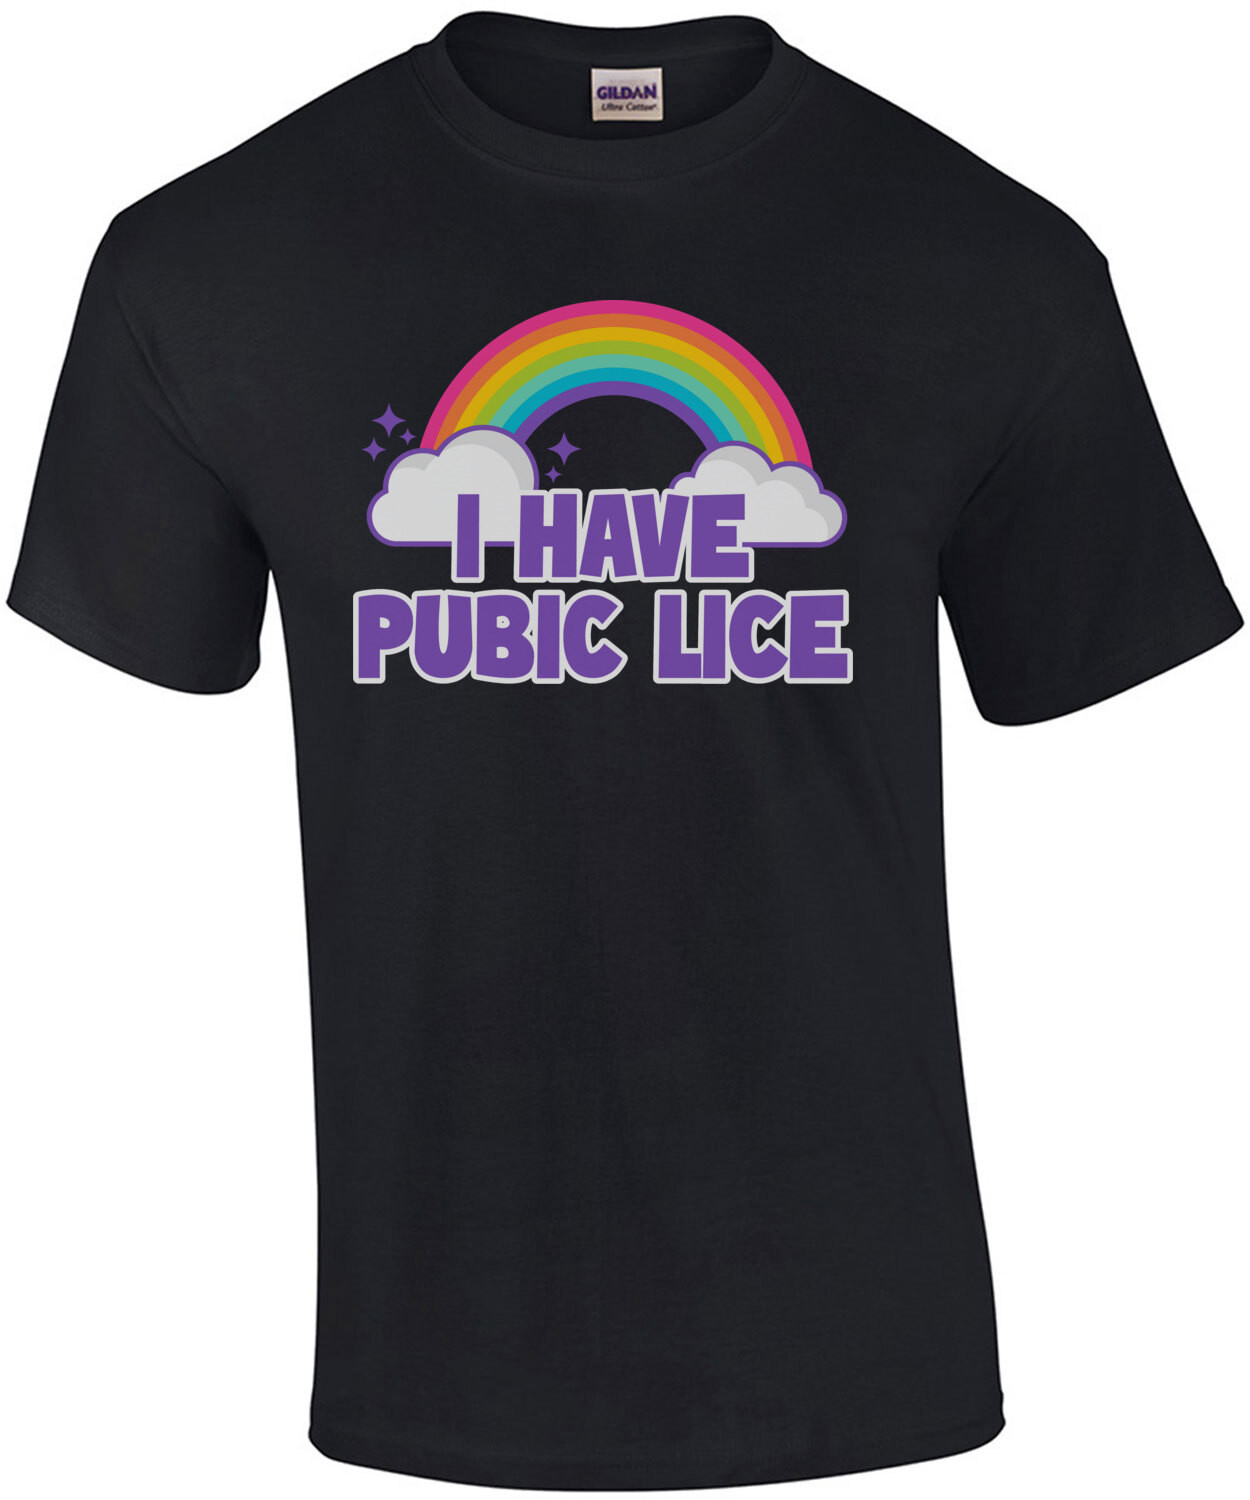 I have pubic lice - funny offensive sexual t-shirt